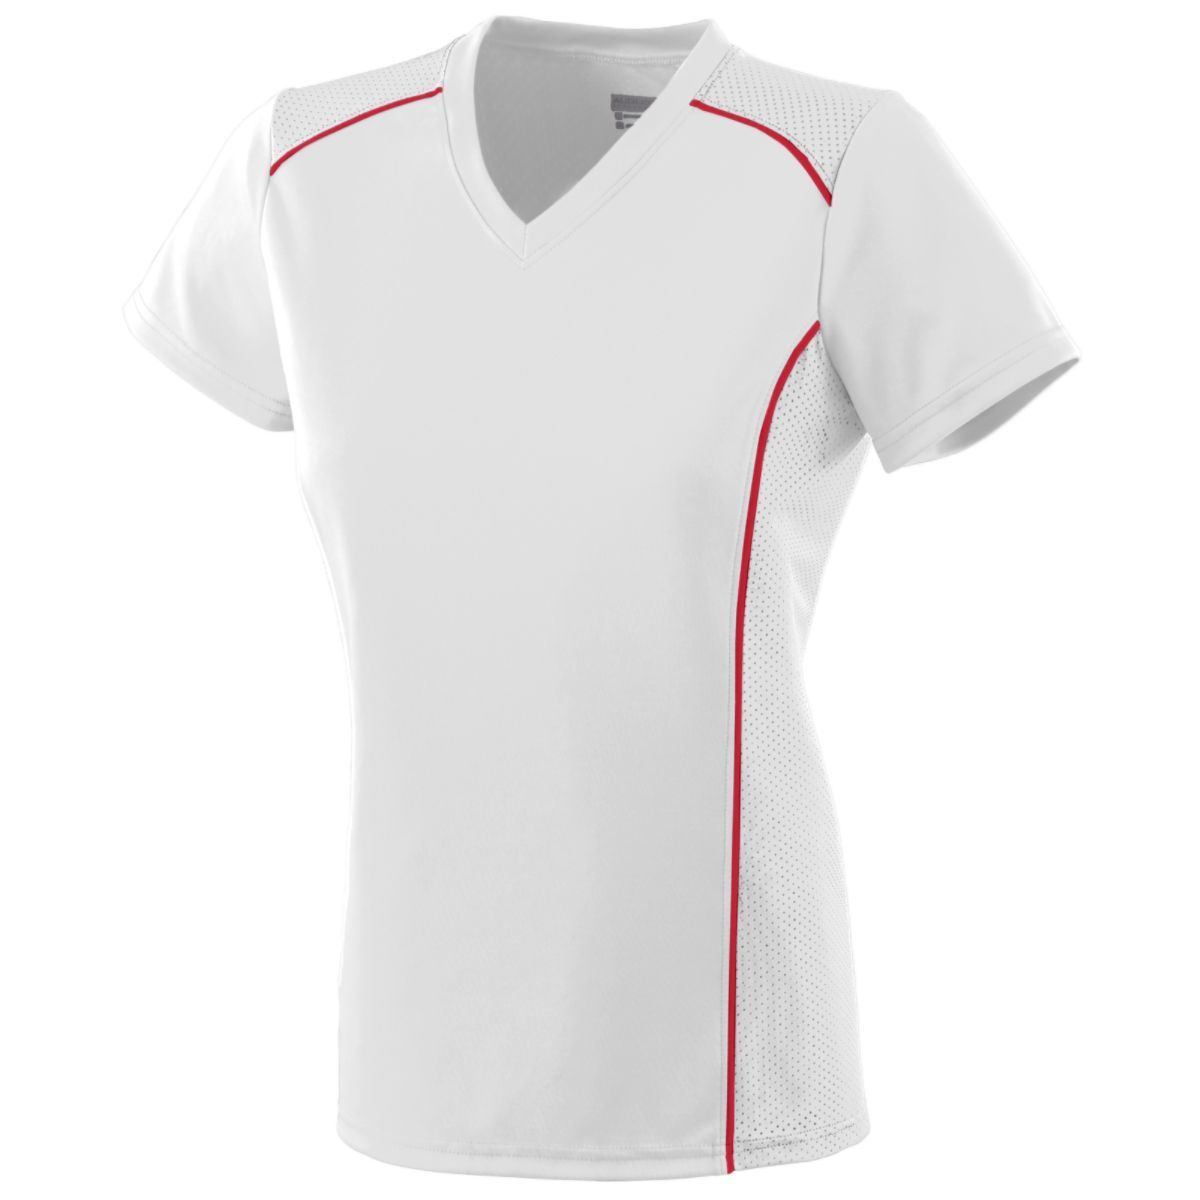 Augusta Sportswear Girls Winning Streak Jersey in White/Red  -Part of the Girls, Augusta-Products, Soccer, Girls-Jersey, Shirts, All-Sports-1 product lines at KanaleyCreations.com